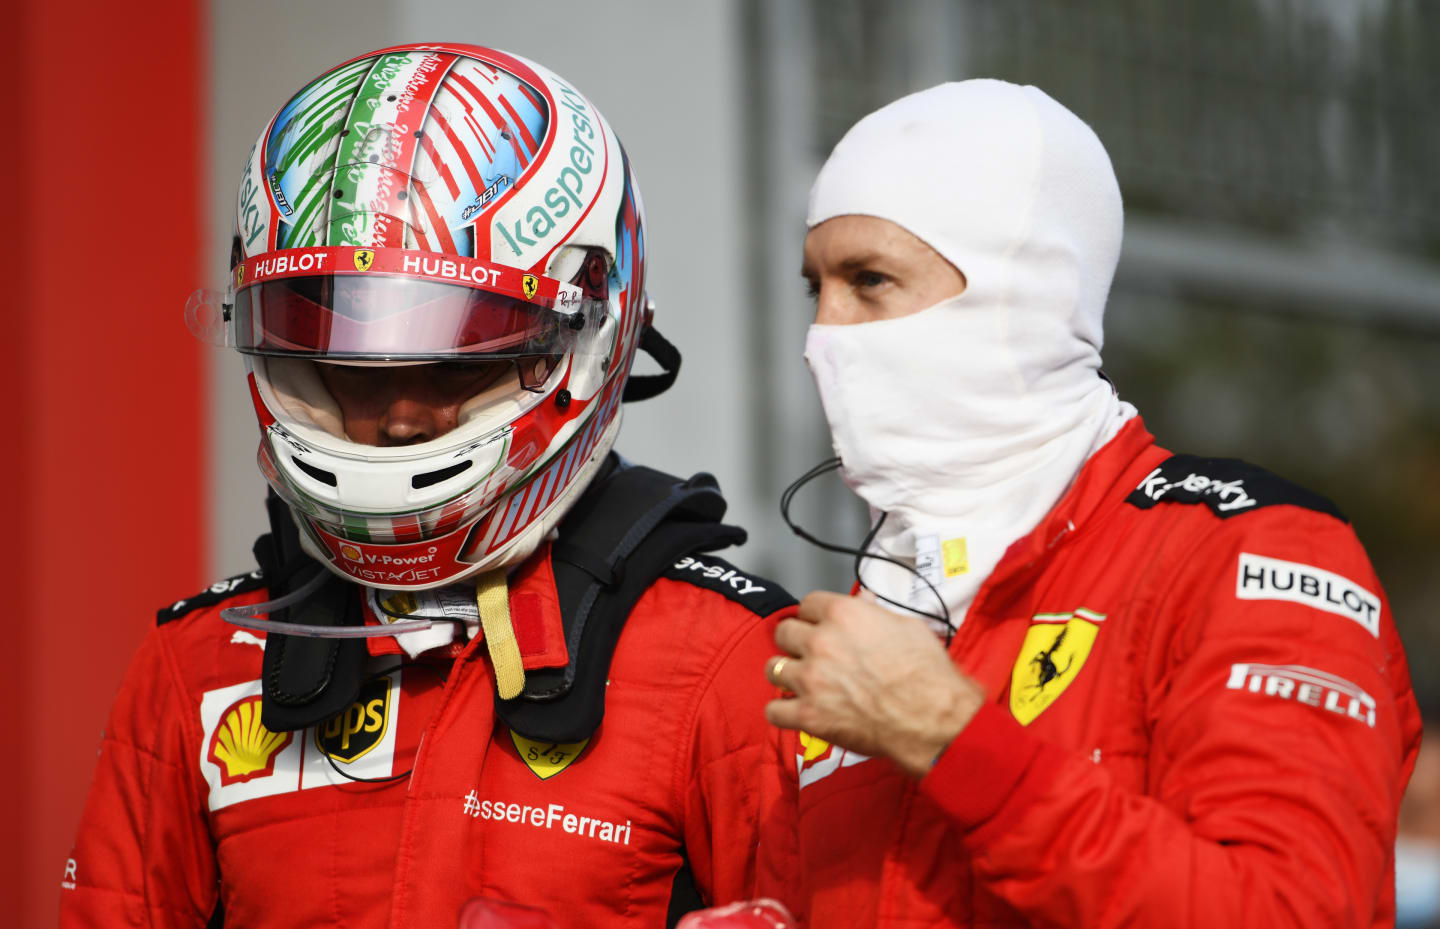 IMOLA, ITALY - NOVEMBER 01: Charles Leclerc of Monaco and Ferrari speaks with teammate Sebastian Vettel of Germany and Ferrari in parc ferme during the F1 Grand Prix of Emilia Romagna at Autodromo Enzo e Dino Ferrari on November 01, 2020 in Imola, Italy. (Photo by Rudy Carezzevoli/Getty Images)